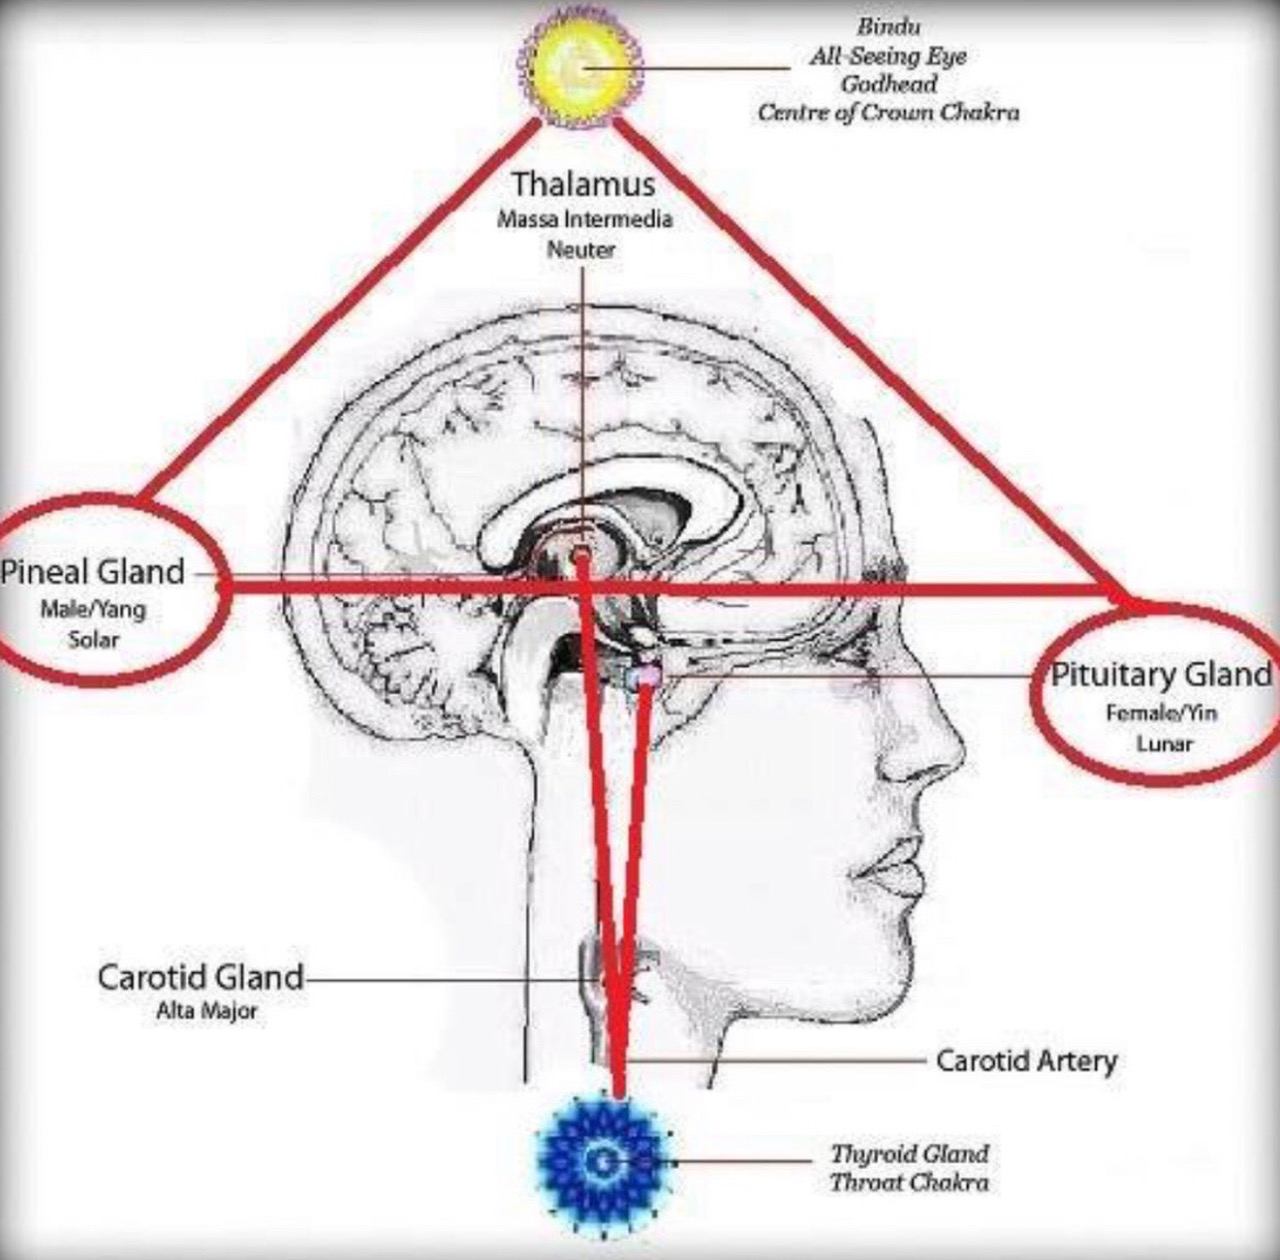 The master cell held in the pineal gland, upon receiving the higher frequency information, activates all other cellular behaviors. As we move through our transformational work and are able to receive and metabolize the higher frequencies, this also changes our physical DNA